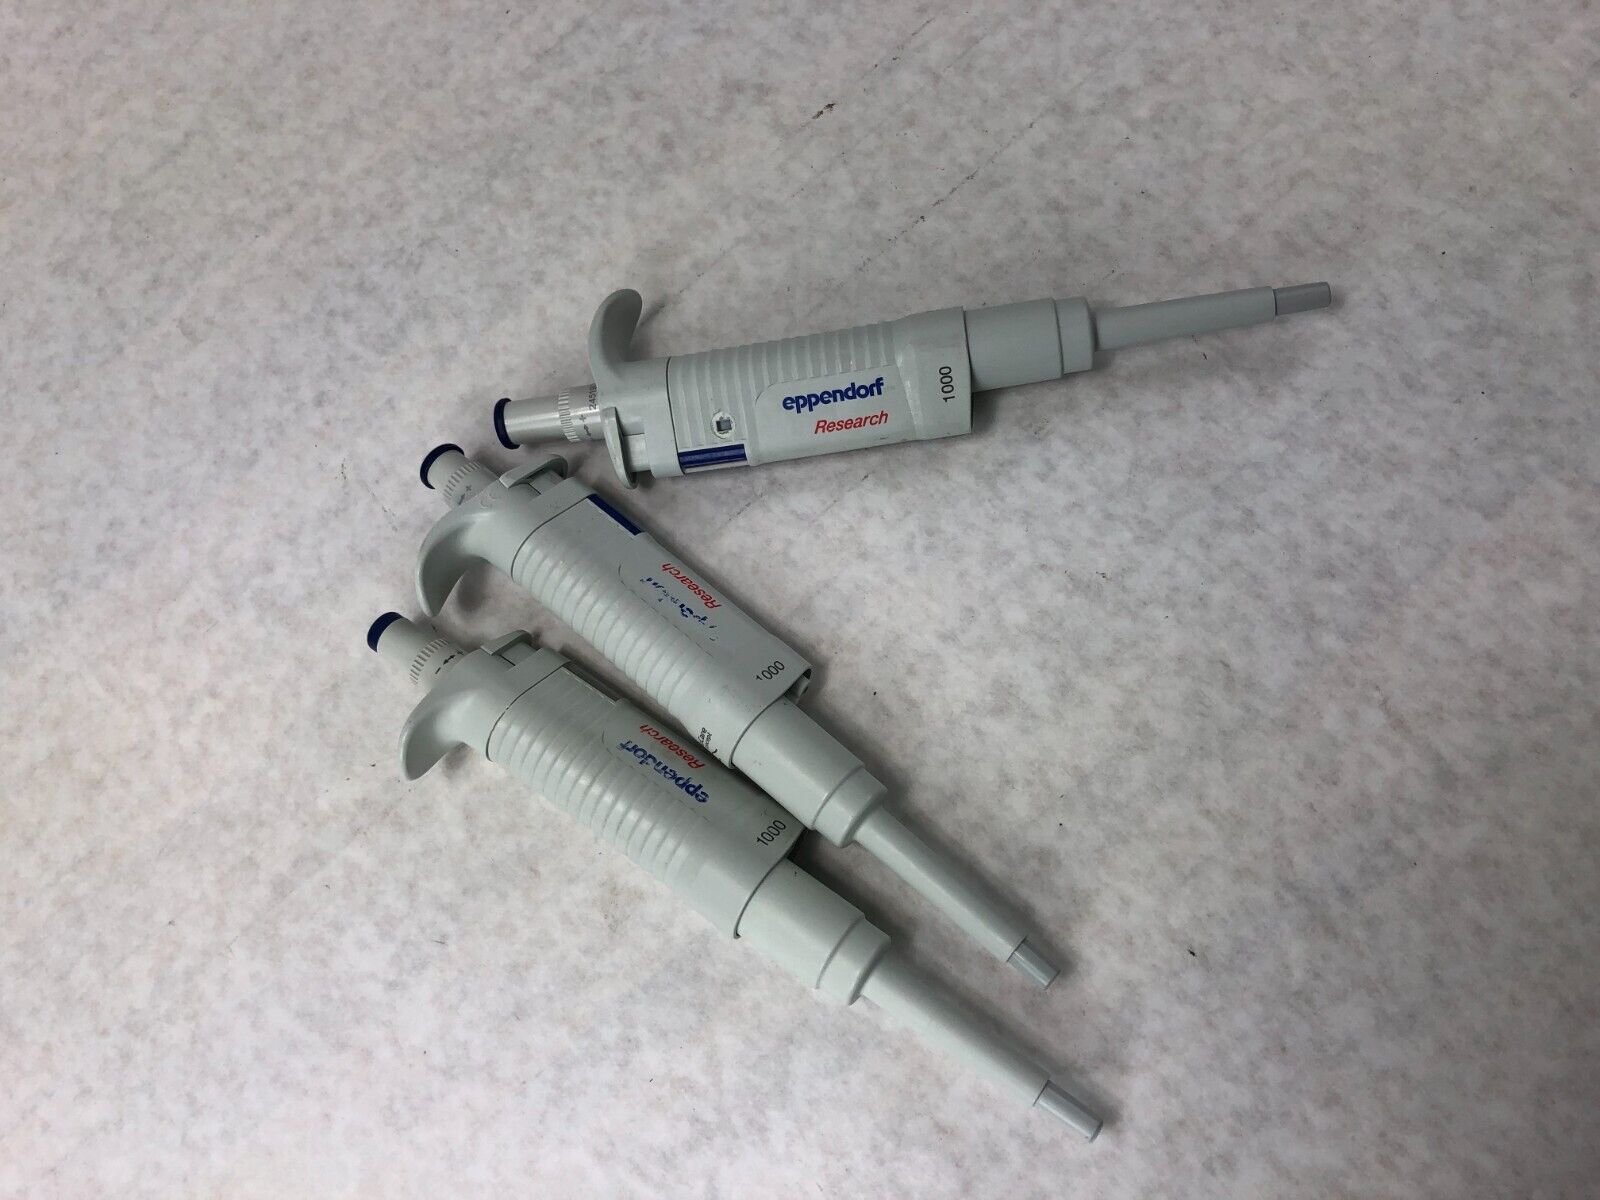 Lot of 3 Eppendorf Research 100-1000uL 1000 Pippette